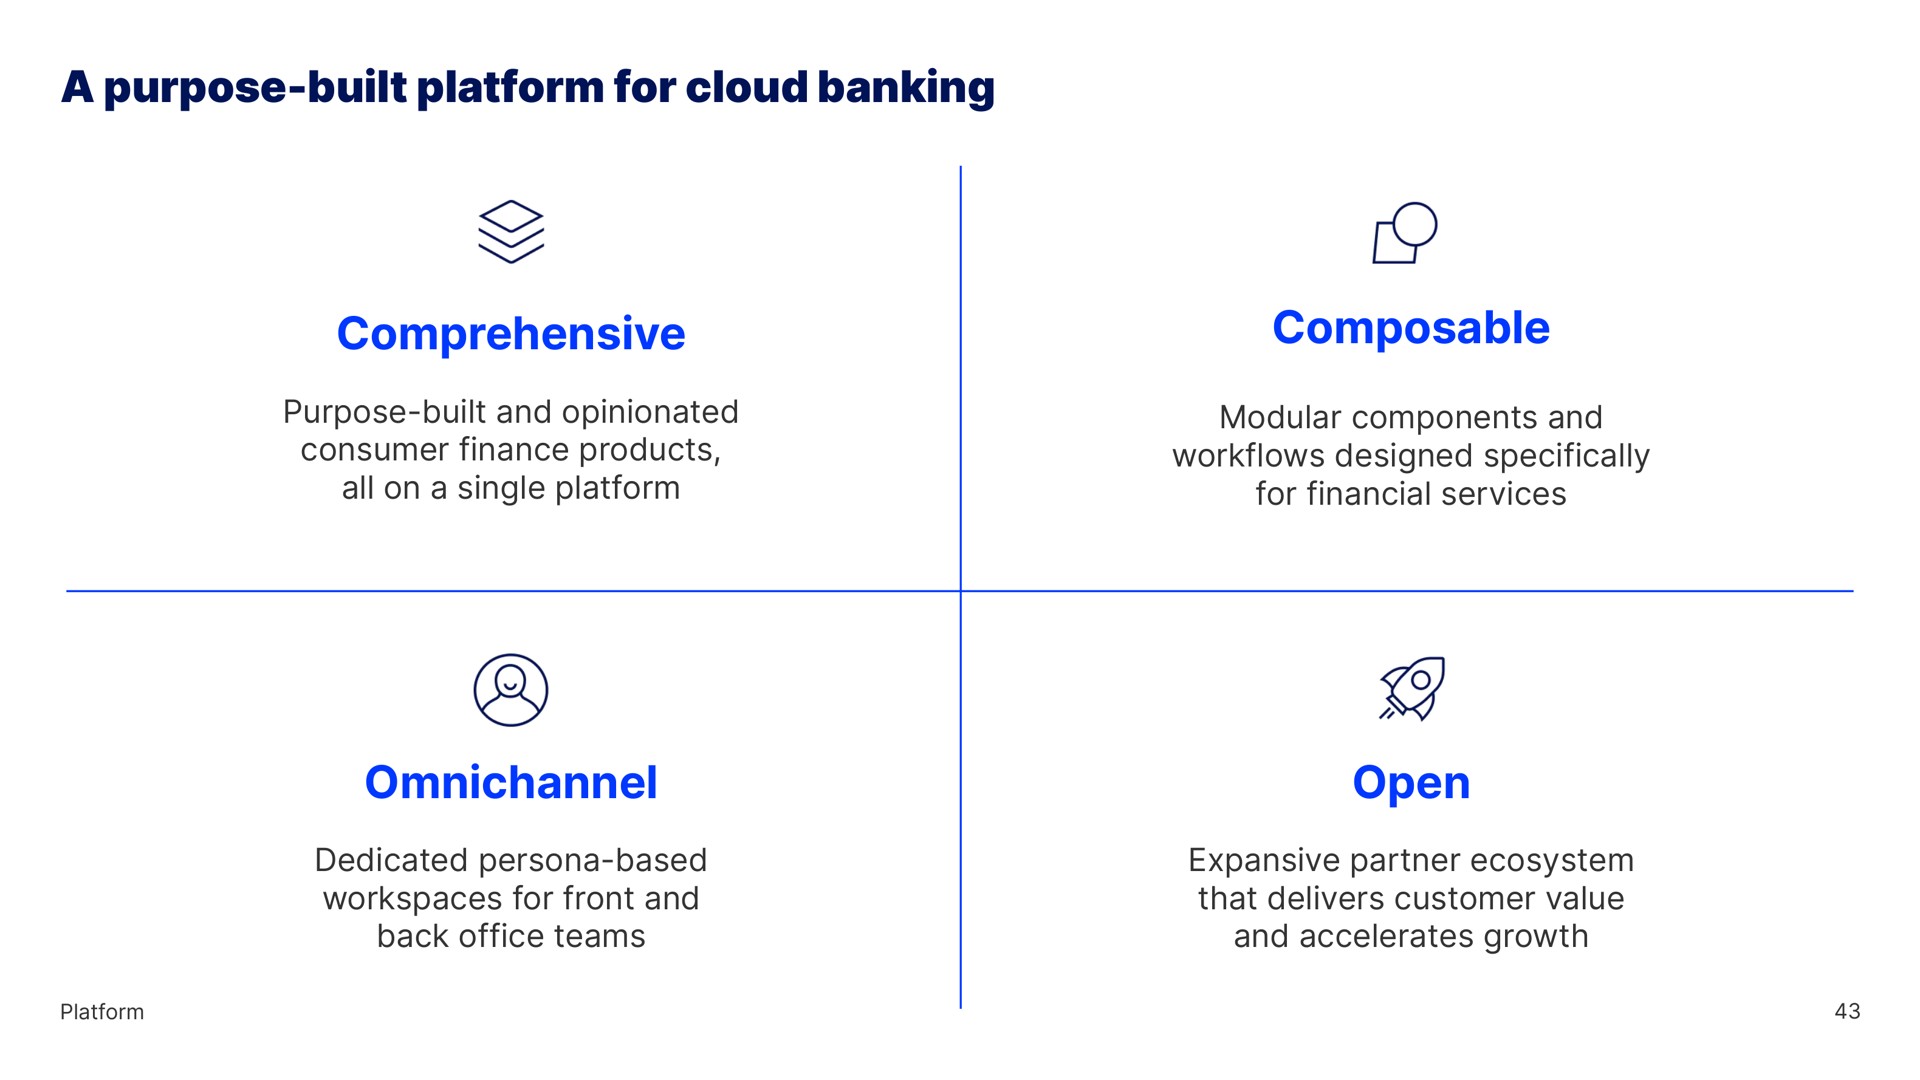 a purpose built platform for cloud banking comprehensive purpose built and opinionated consumer finance products all on a single platform modular components and designed specifically for financial services dedicated persona based for front and back office teams open expansive partner ecosystem that delivers customer value and accelerates growth | Blend